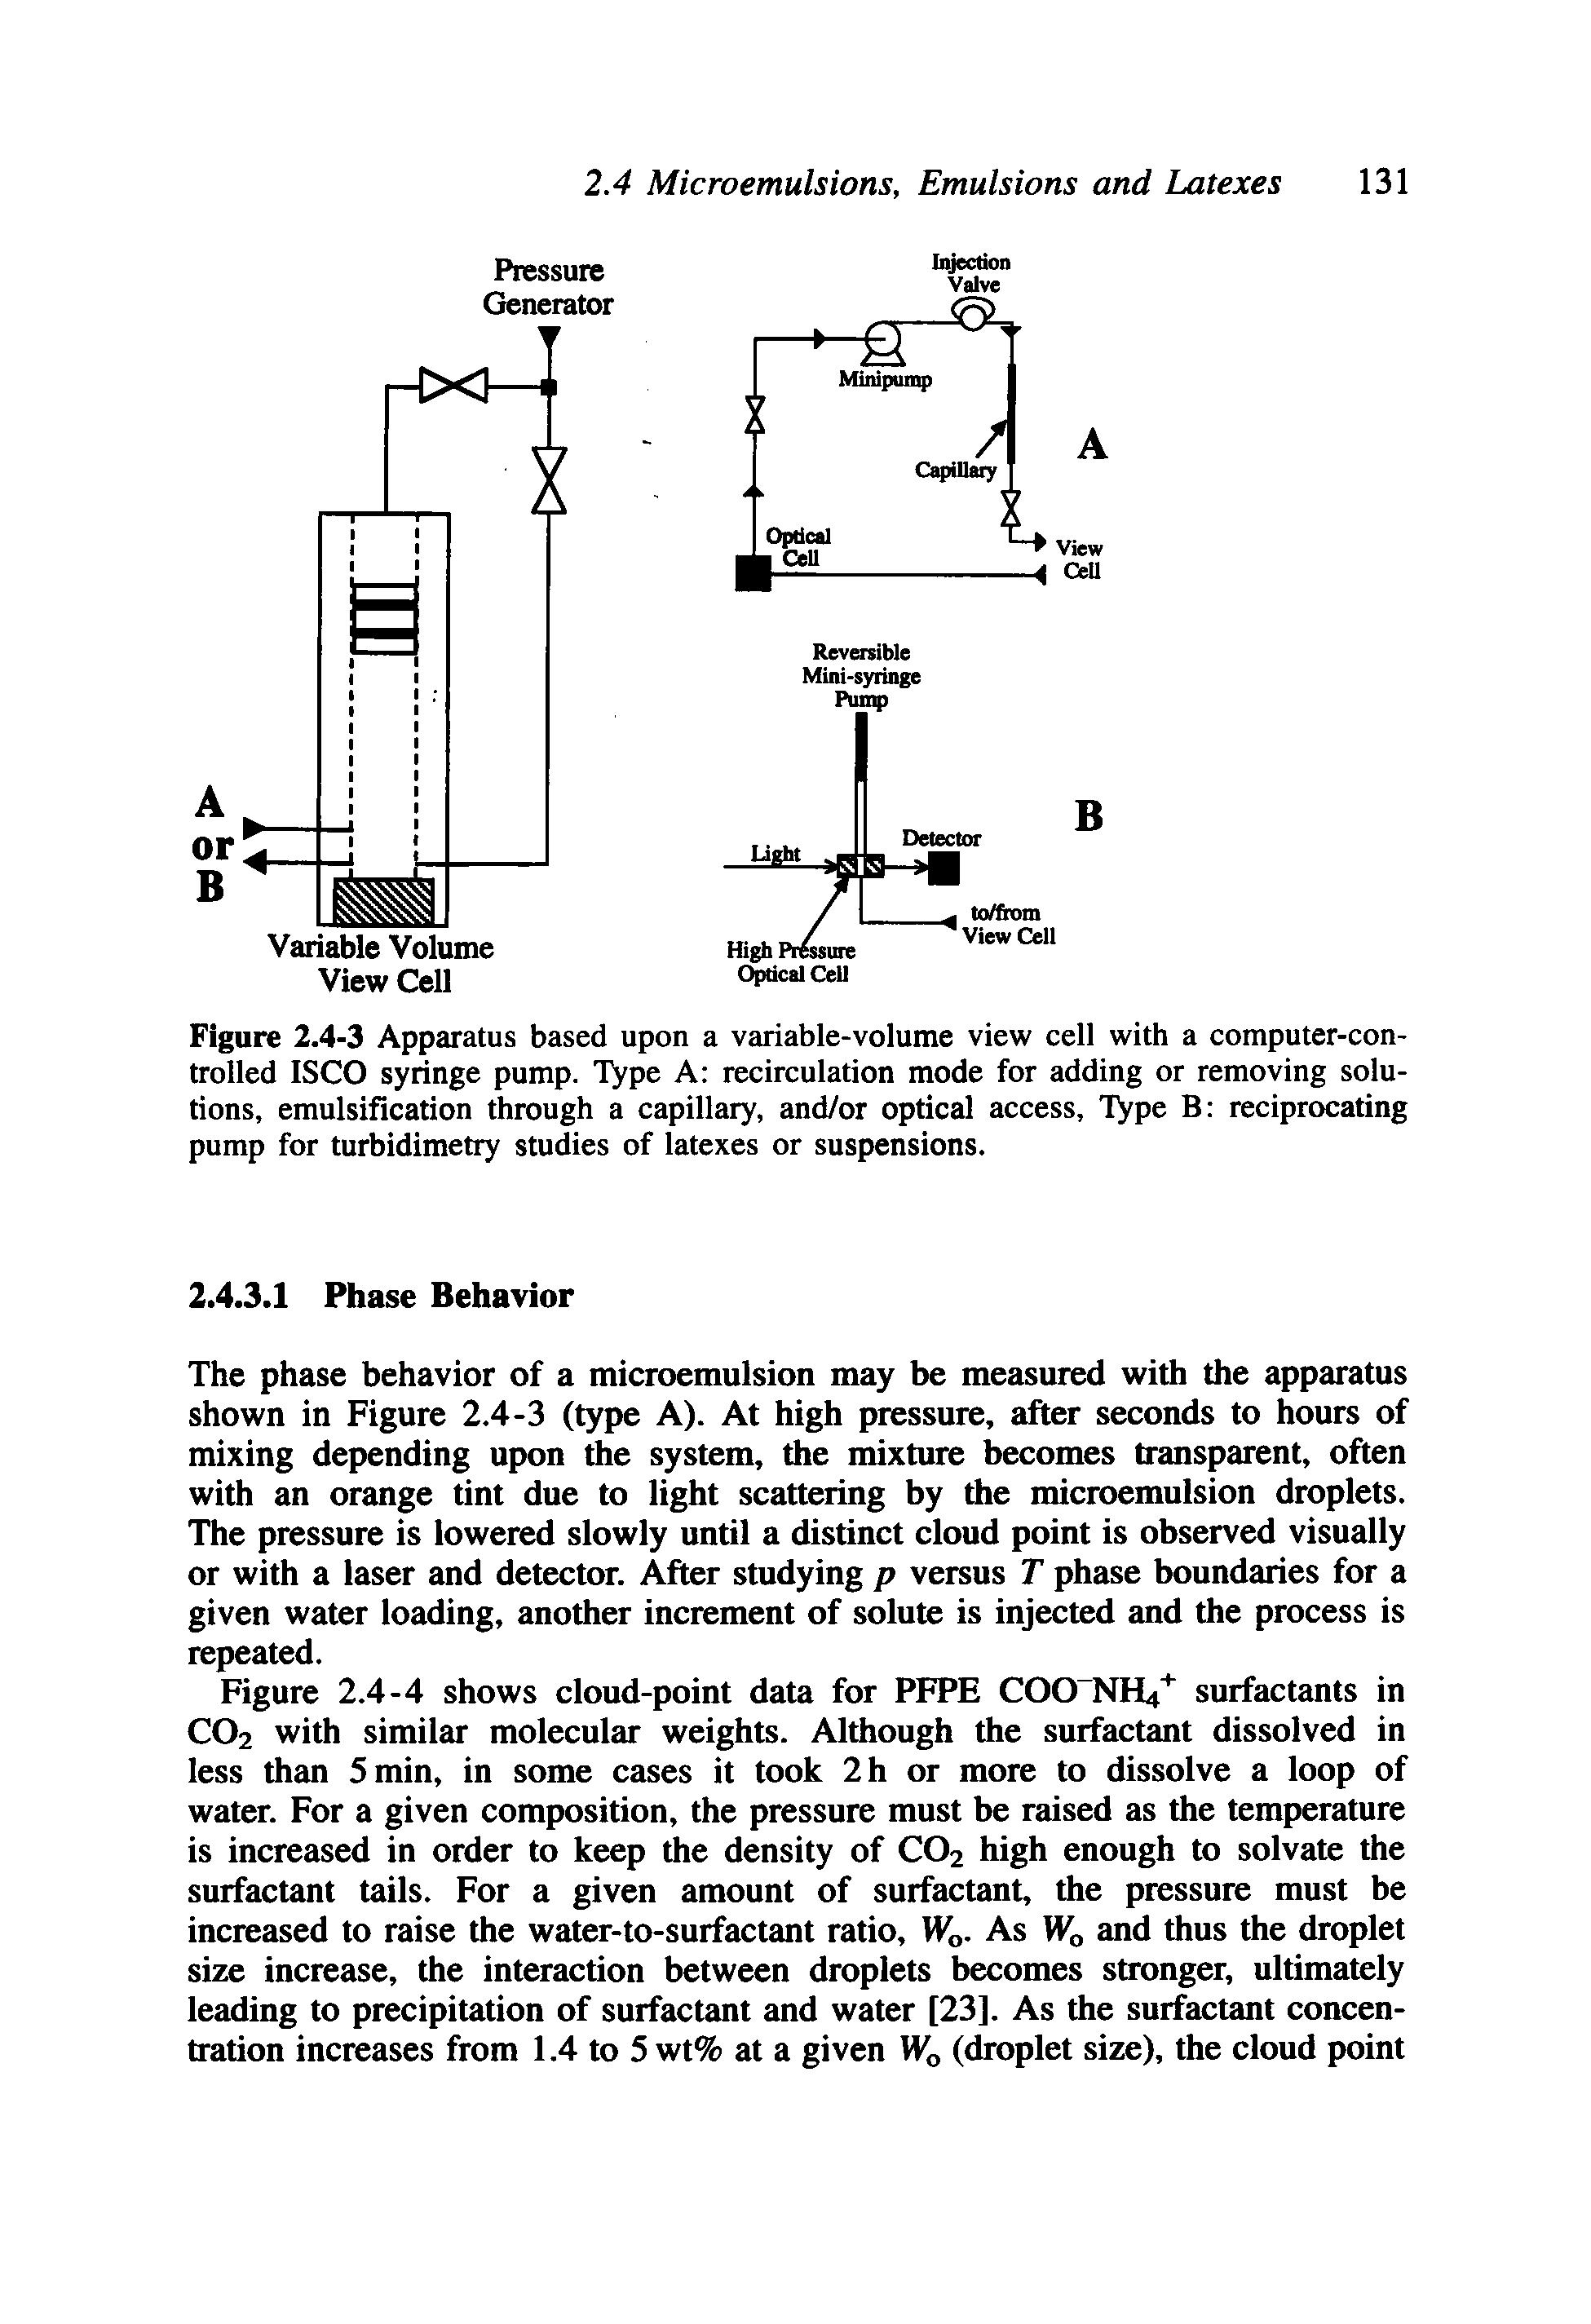 Figure 2.4-3 Apparatus based upon a variable-volume view cell with a computer-controlled ISCO syringe pump. Type A recirculation mode for adding or removing solutions, emulsification through a capillary, and/or optical access. Type B reciprocating pump for turbidimetry studies of latexes or suspensions.